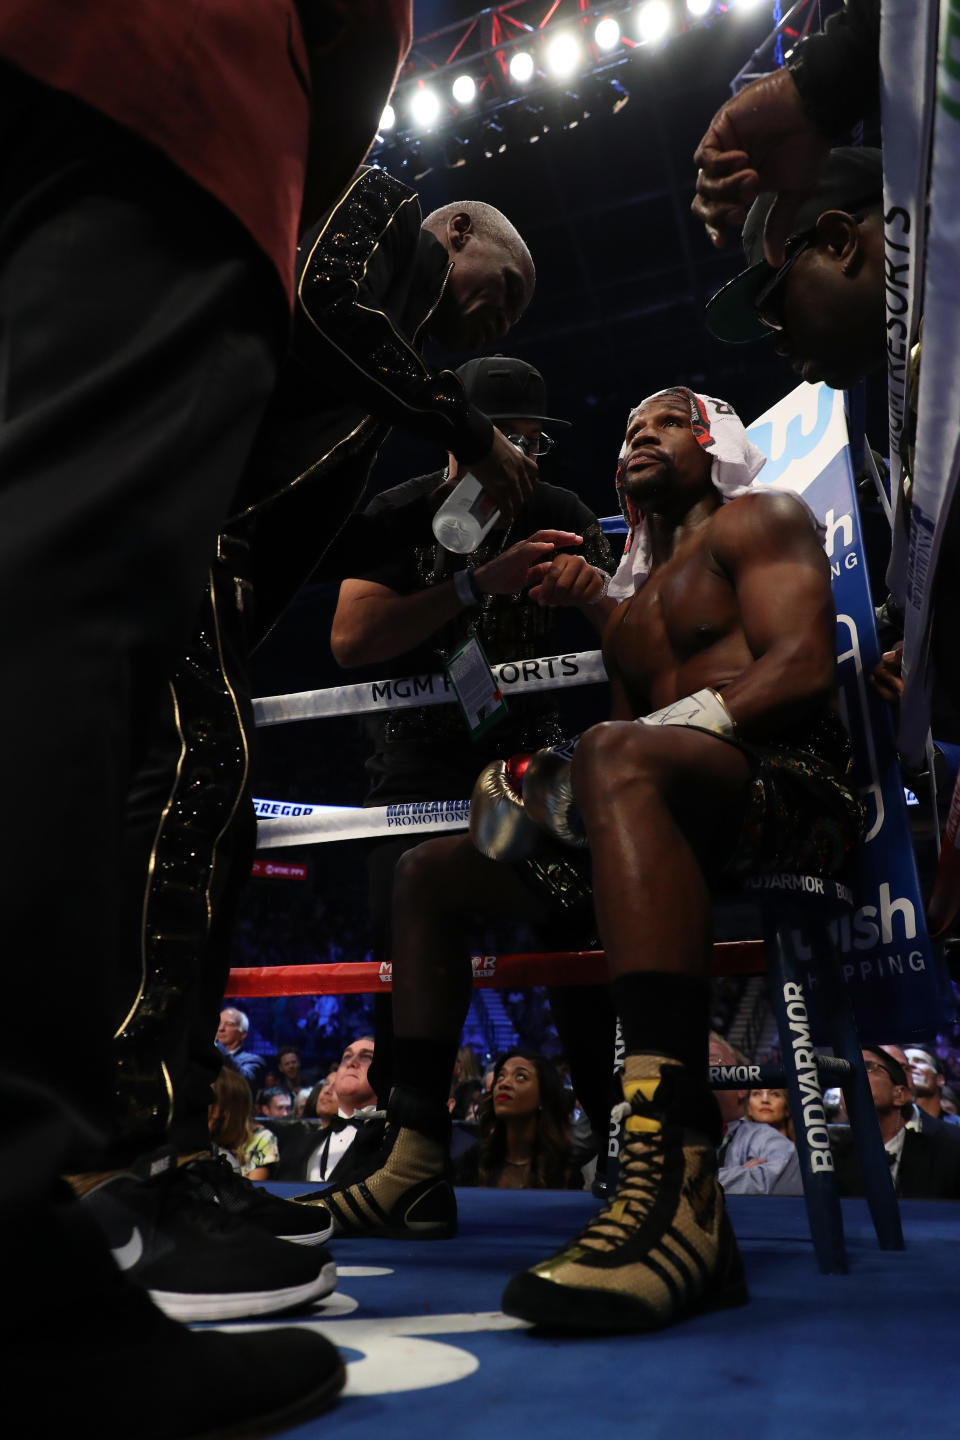 LAS VEGAS, NV - AUGUST 26:  (L-R) Floyd Mayweather Jr. sits in his corner in between rounds of his super welterweight boxing match against Conor McGregor on August 26, 2017 at T-Mobile Arena in Las Vegas, Nevada.  (Photo by Christian Petersen/Getty Images)